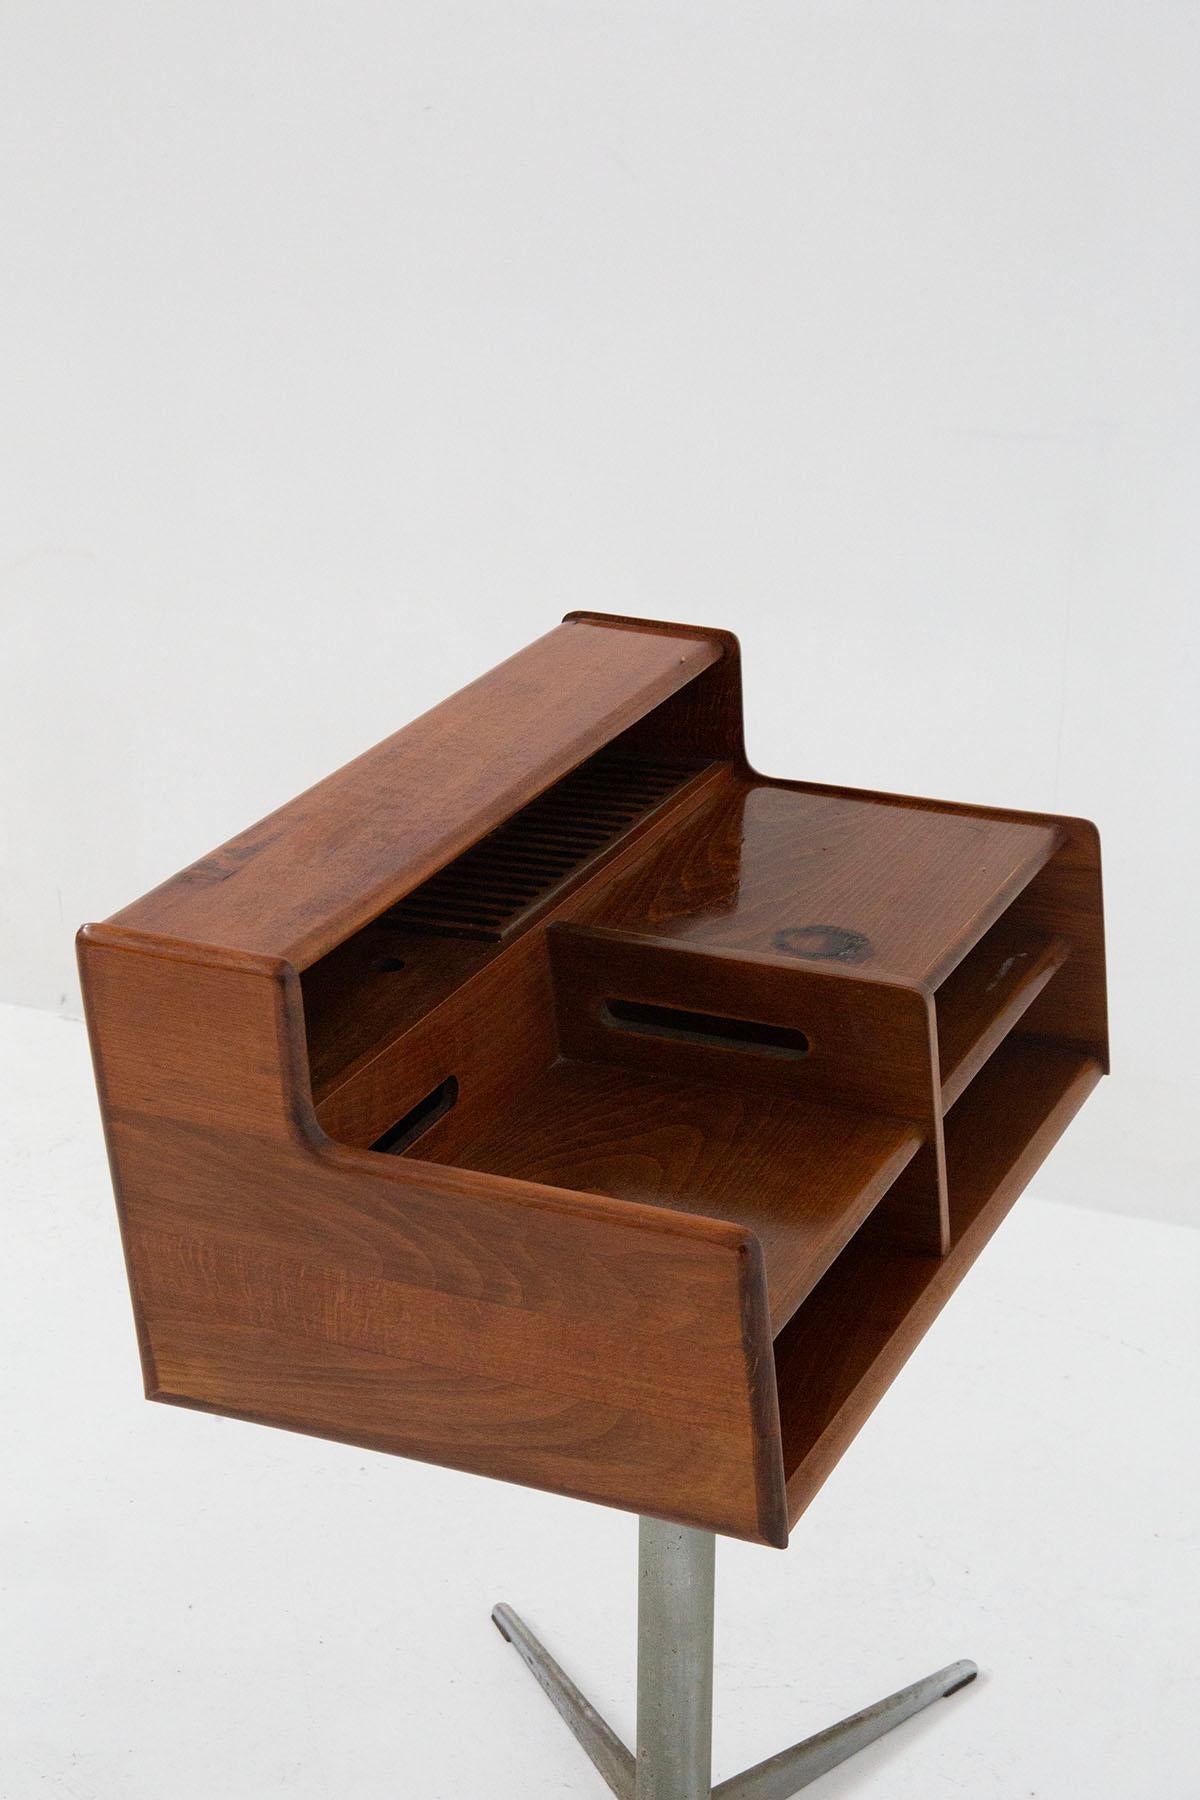 Mid-20th Century Small Italian Desk Manufactured by Fimsa in Wood and Metal, Label